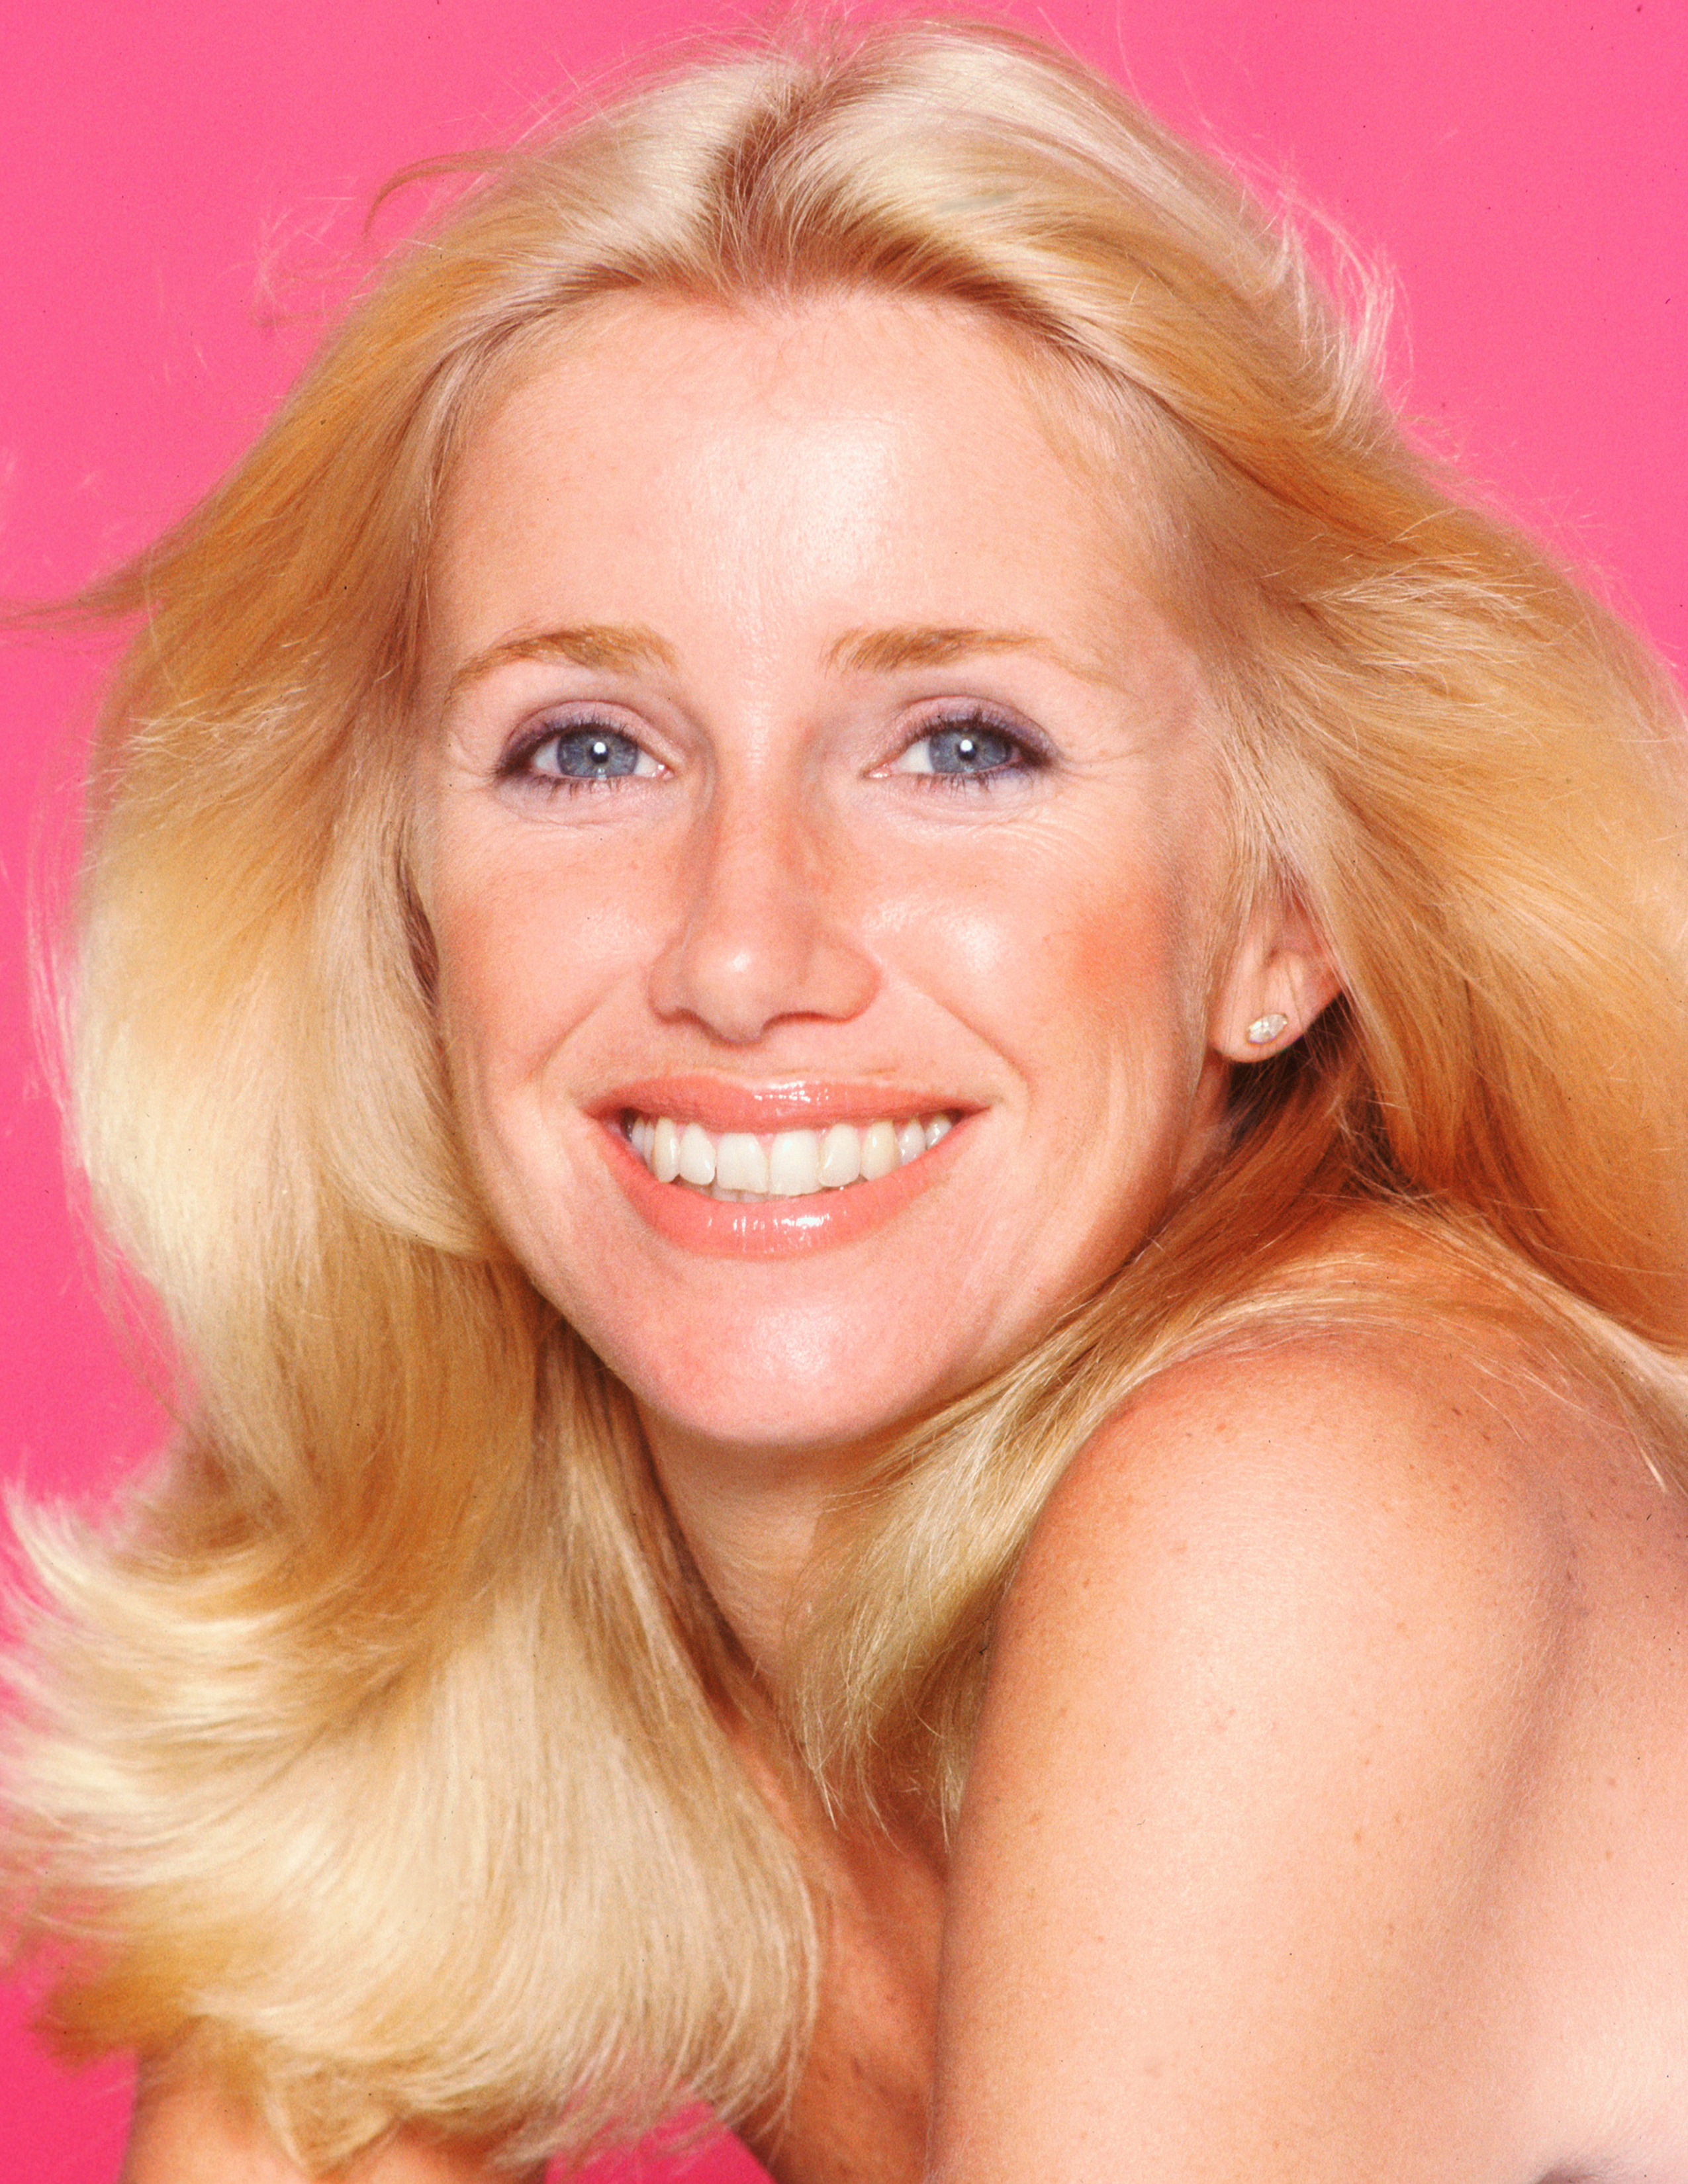 Publicity portrait of the actress, 1977 | Source: Getty Images